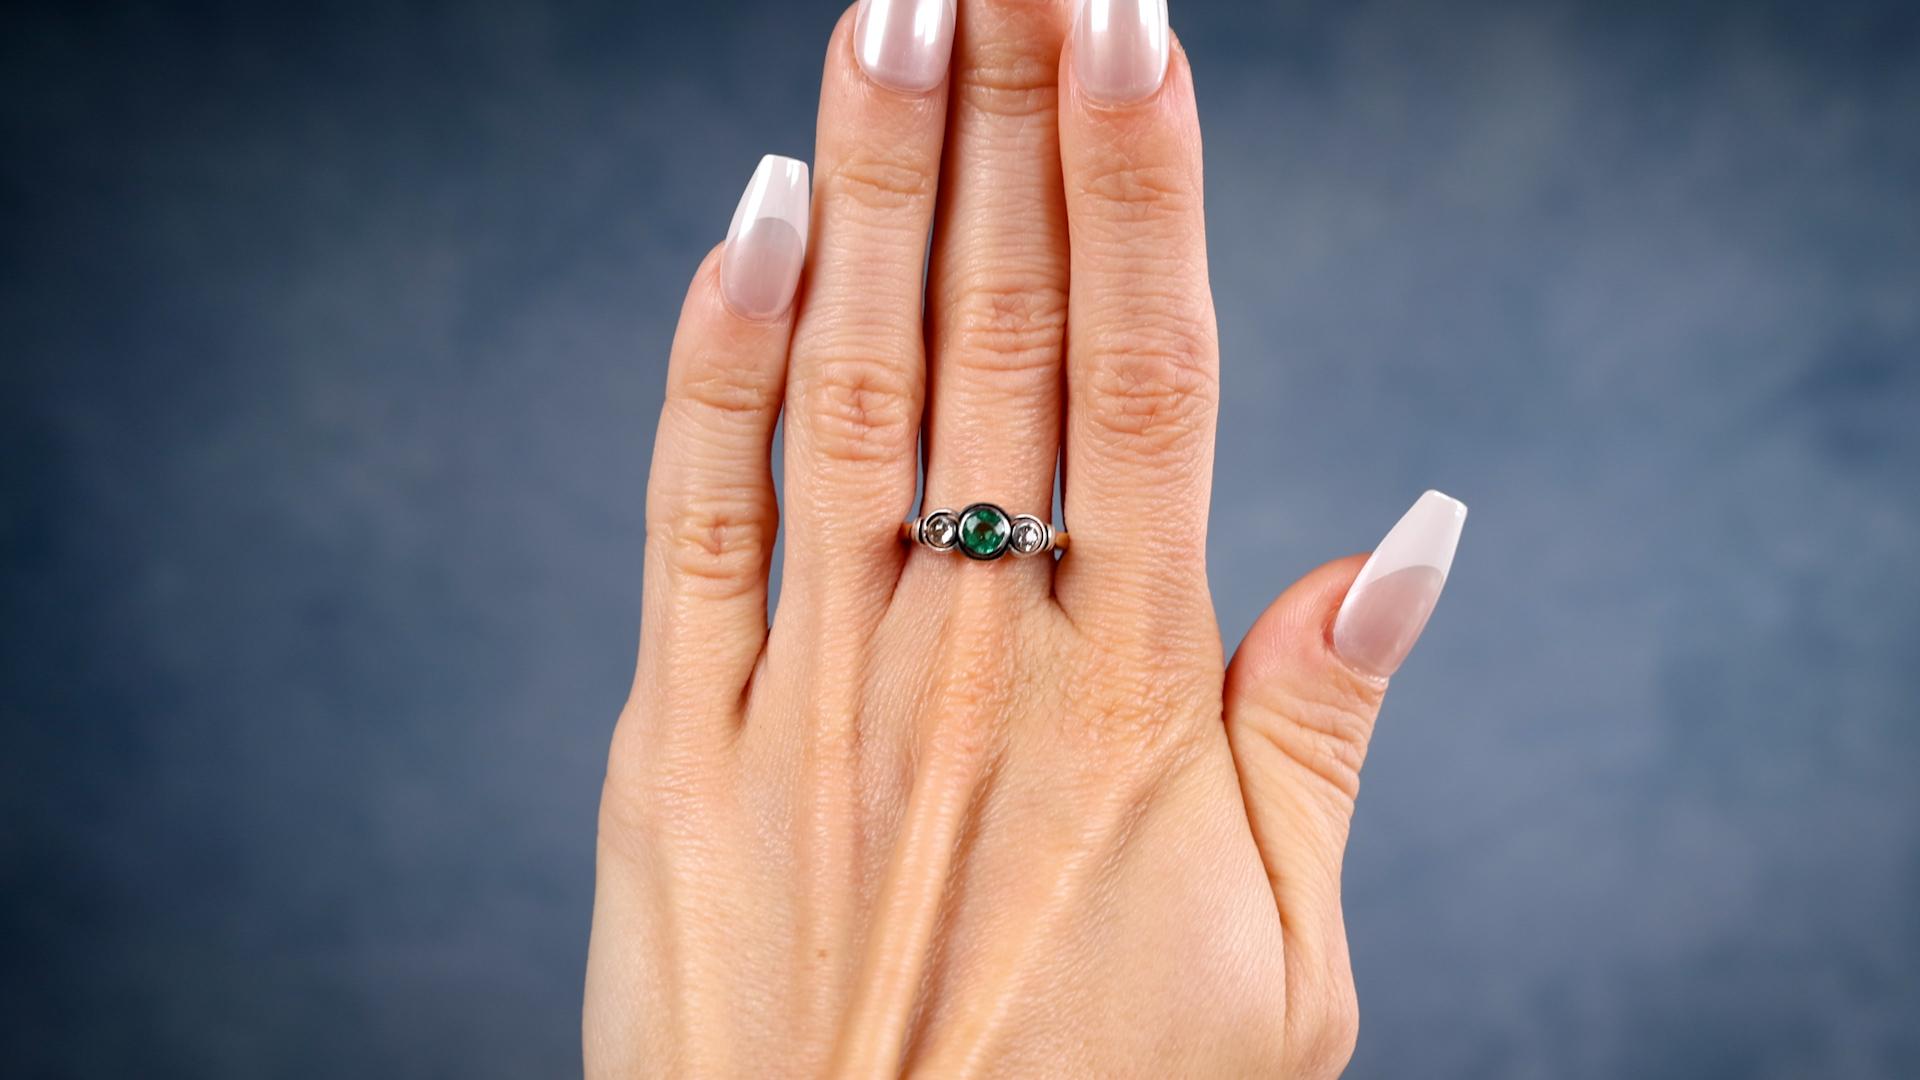 One Victorian Emerald Diamond 14k Yellow Gold Silver Three Stone Ring. Featuring one round mixed cut emerald weighing approximately 0.40 carat. Accented by two old European cut diamonds with a total weight of approximately 0.30 carat, graded I